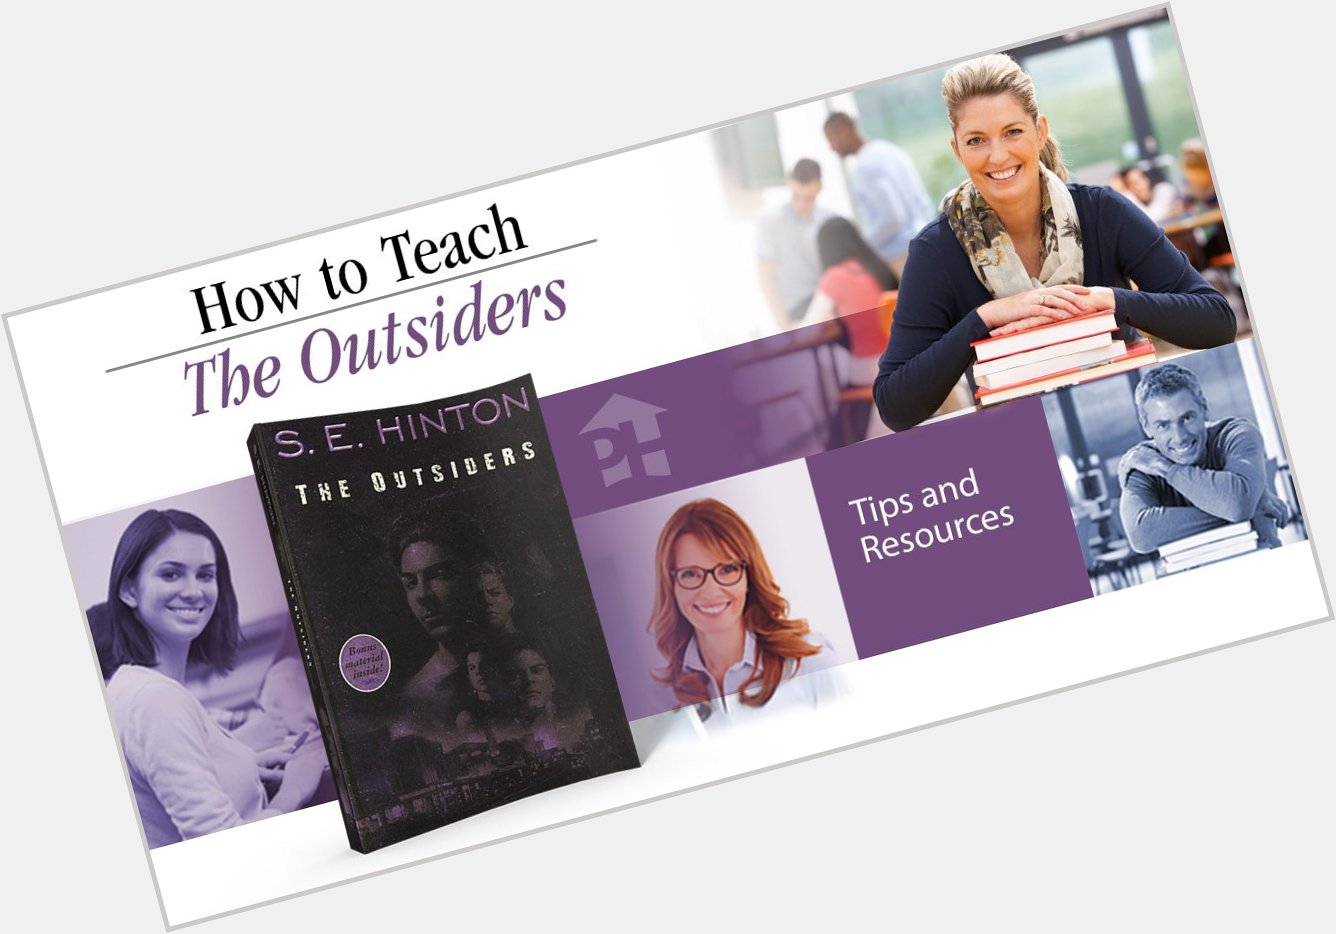 Happy birthday to S.E. Hinton! Here is a free guide on how to teach The Outsiders
 